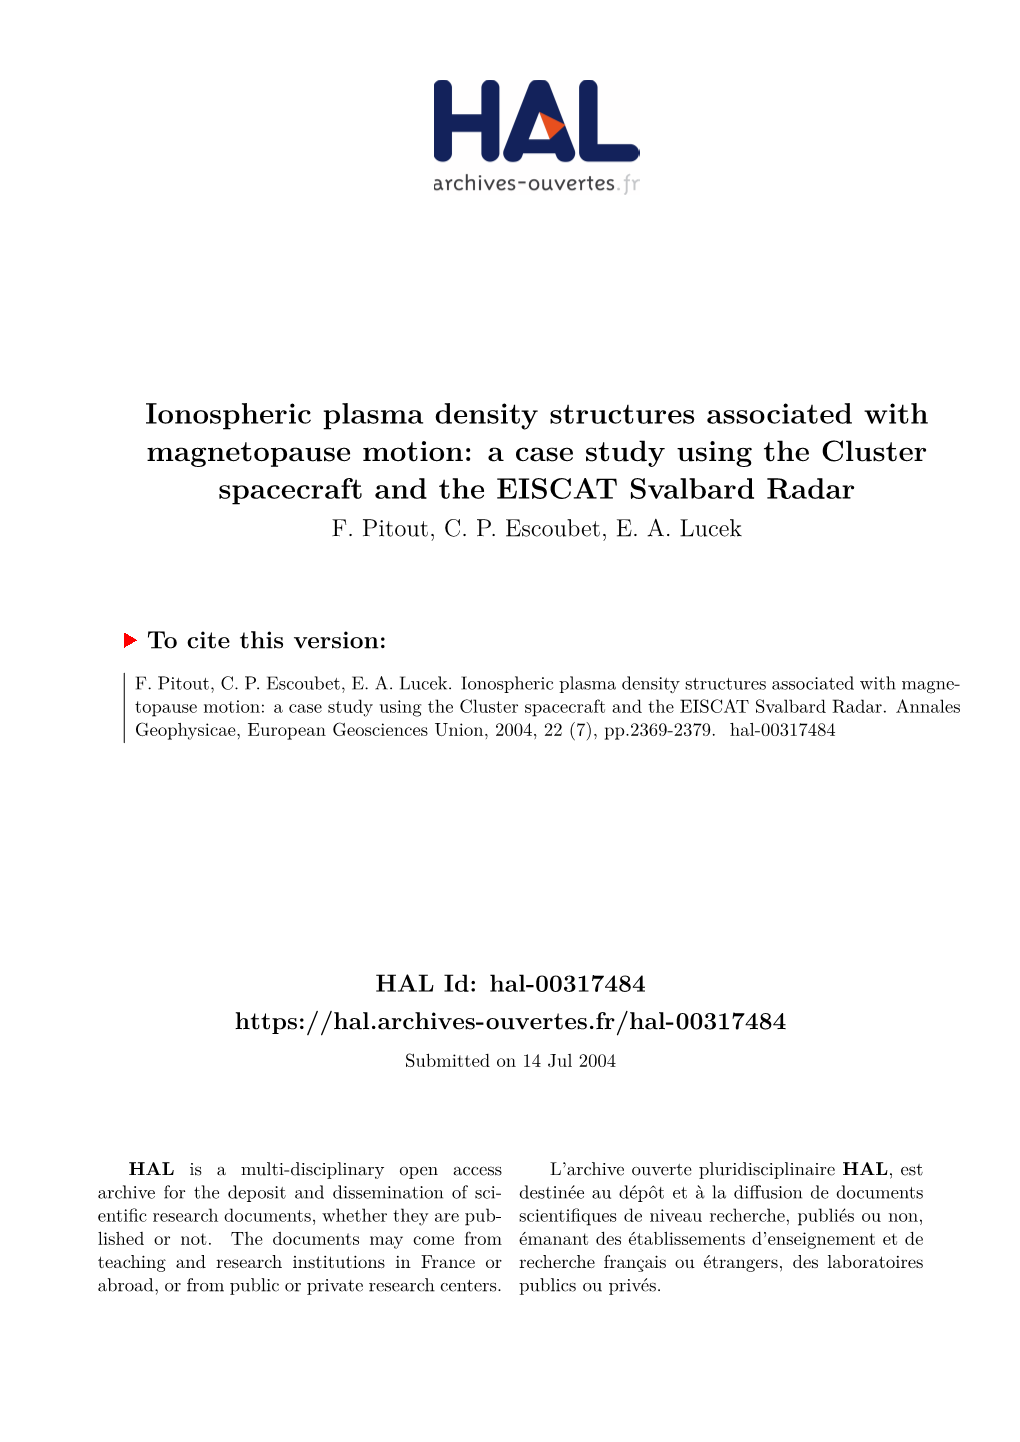 Ionospheric Plasma Density Structures Associated with Magnetopause Motion: a Case Study Using the Cluster Spacecraft and the EISCAT Svalbard Radar F